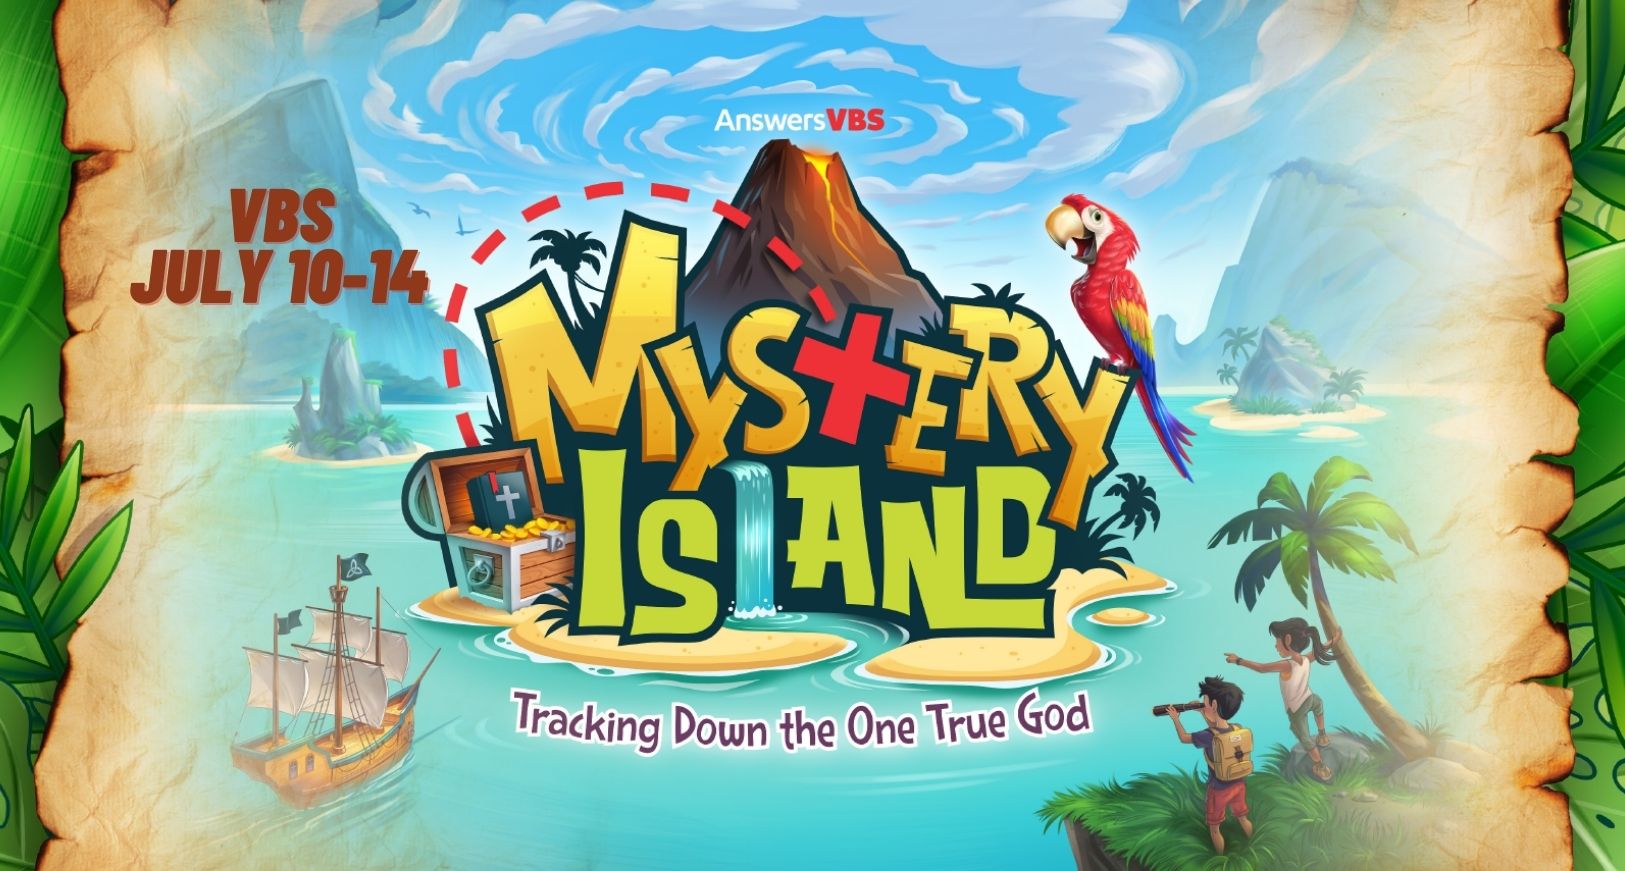 VBS-JULY-10-14